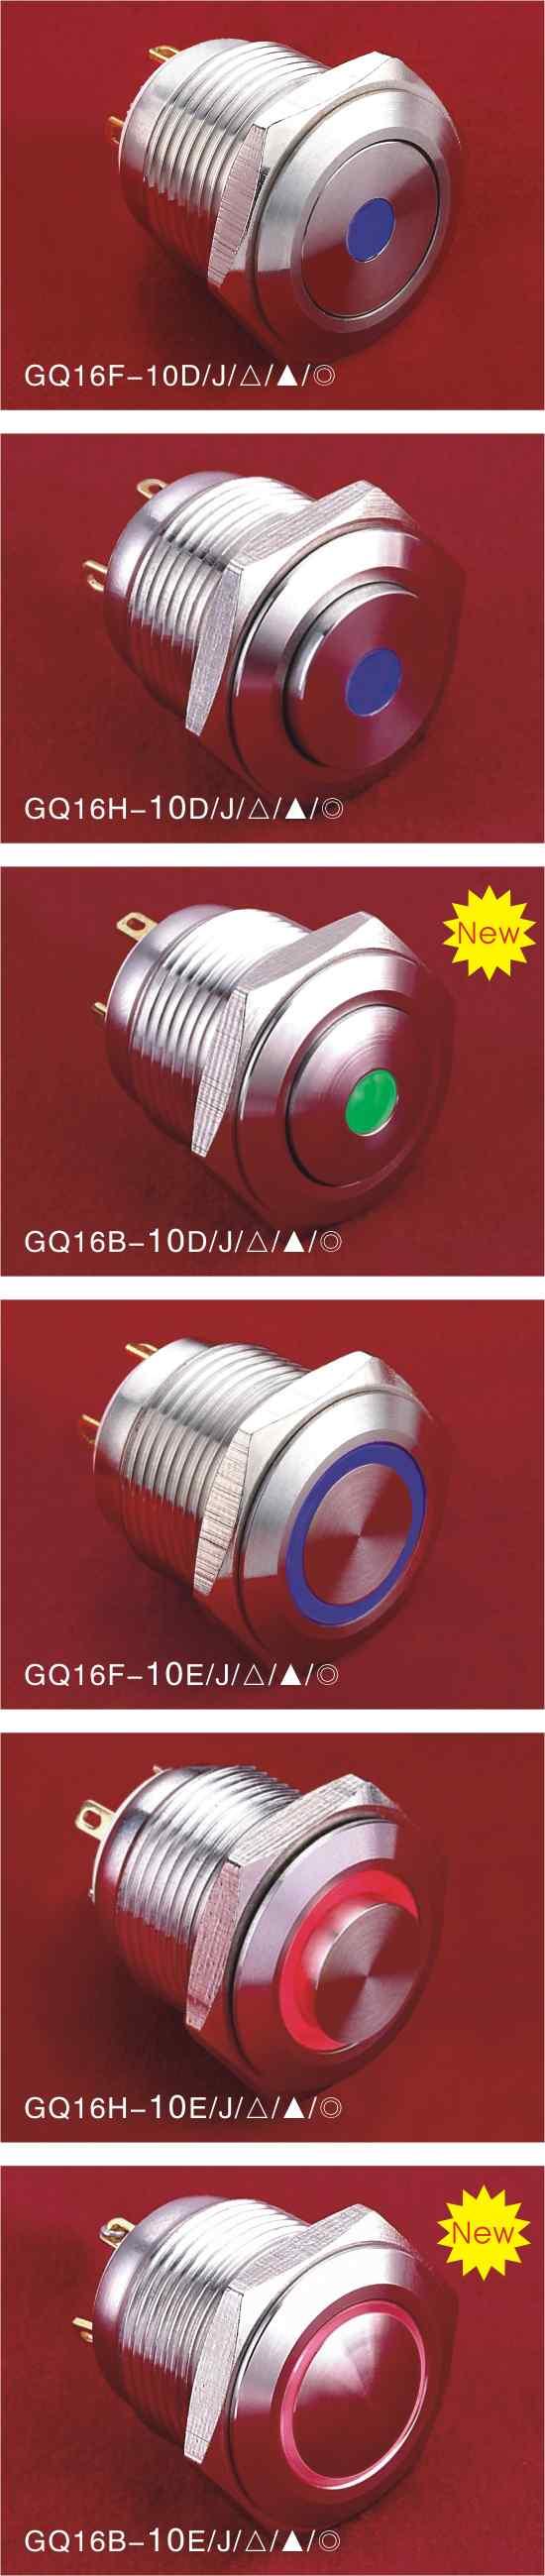 For signal lamp,part number is:gq16f-d/j/ / / 1.5 20 For signal lamp,part number is:gq16h-d/j/ / / 20 For signal lamp,part number is:gq16b-d/j/ / / 20 For signal lamp,part number is:gq16f-e/j/ / / 1.